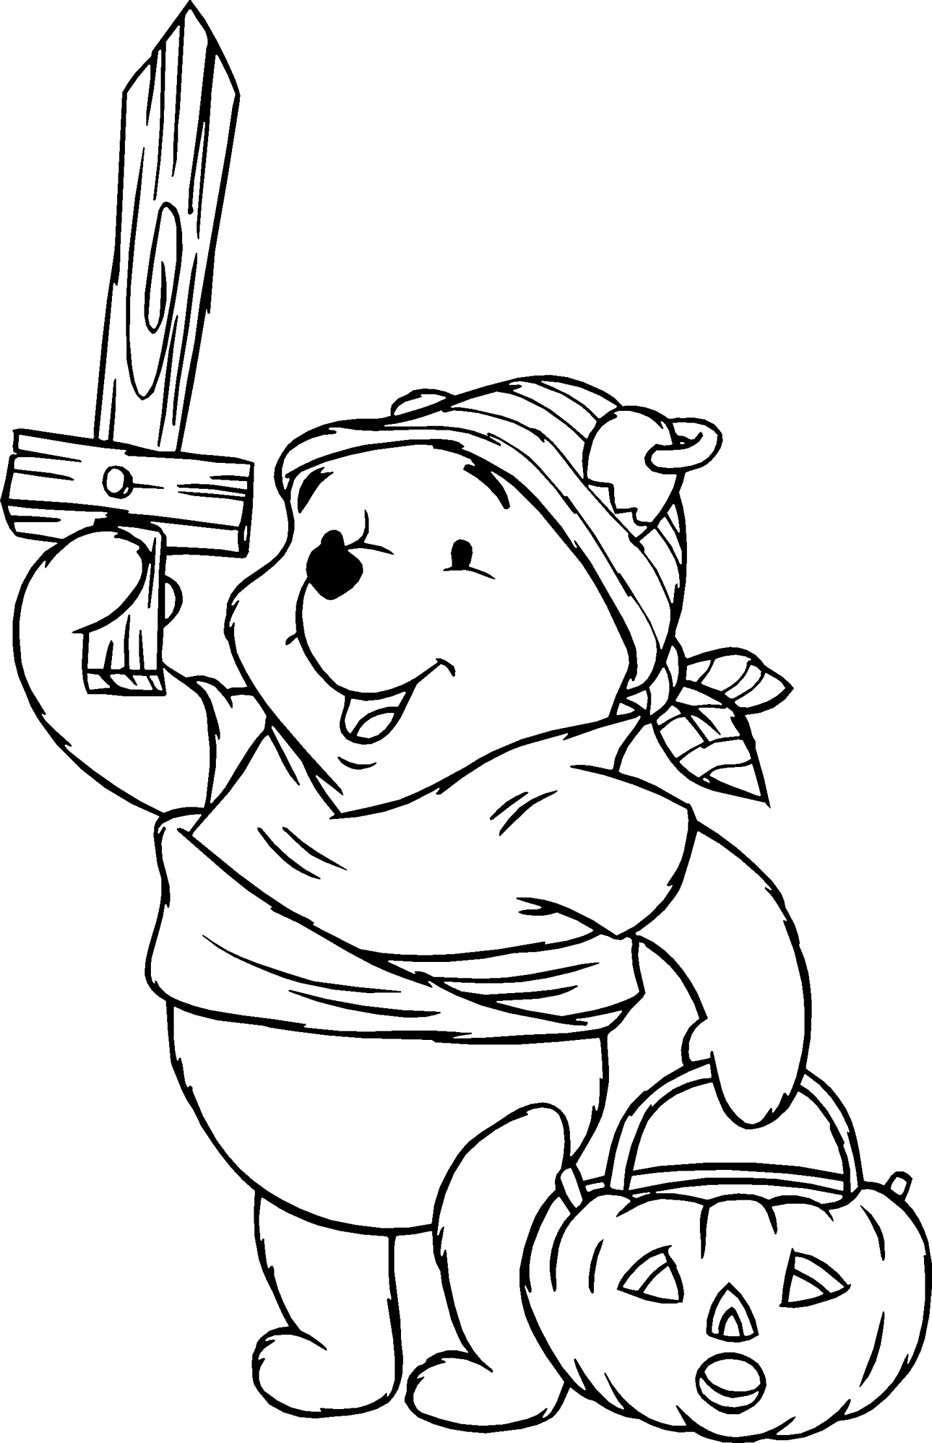 Free Coloring Sheets Halloween
 24 Free Printable Halloween Coloring Pages for Kids